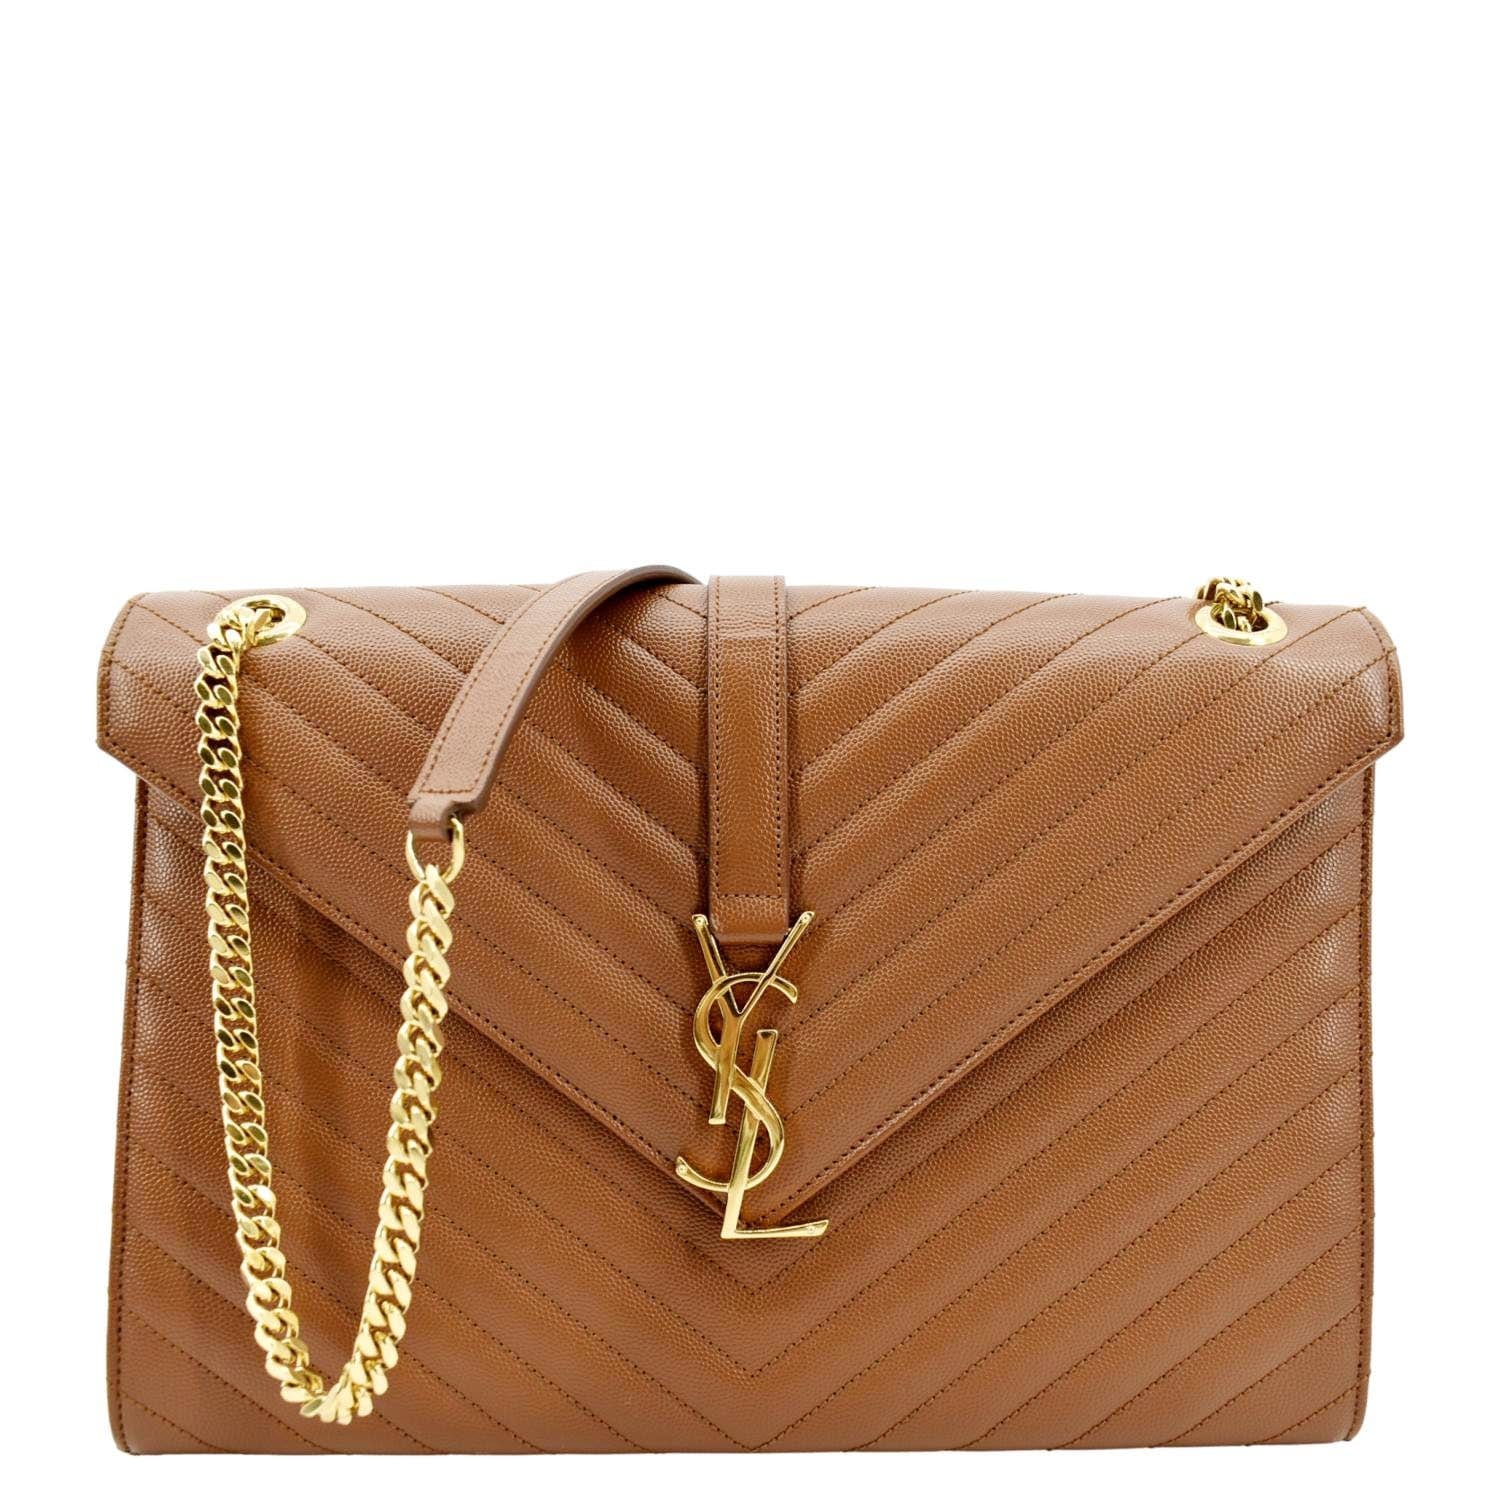 Saint Laurent Small Ysl Envelope Flap Wallet On Chain in Natural